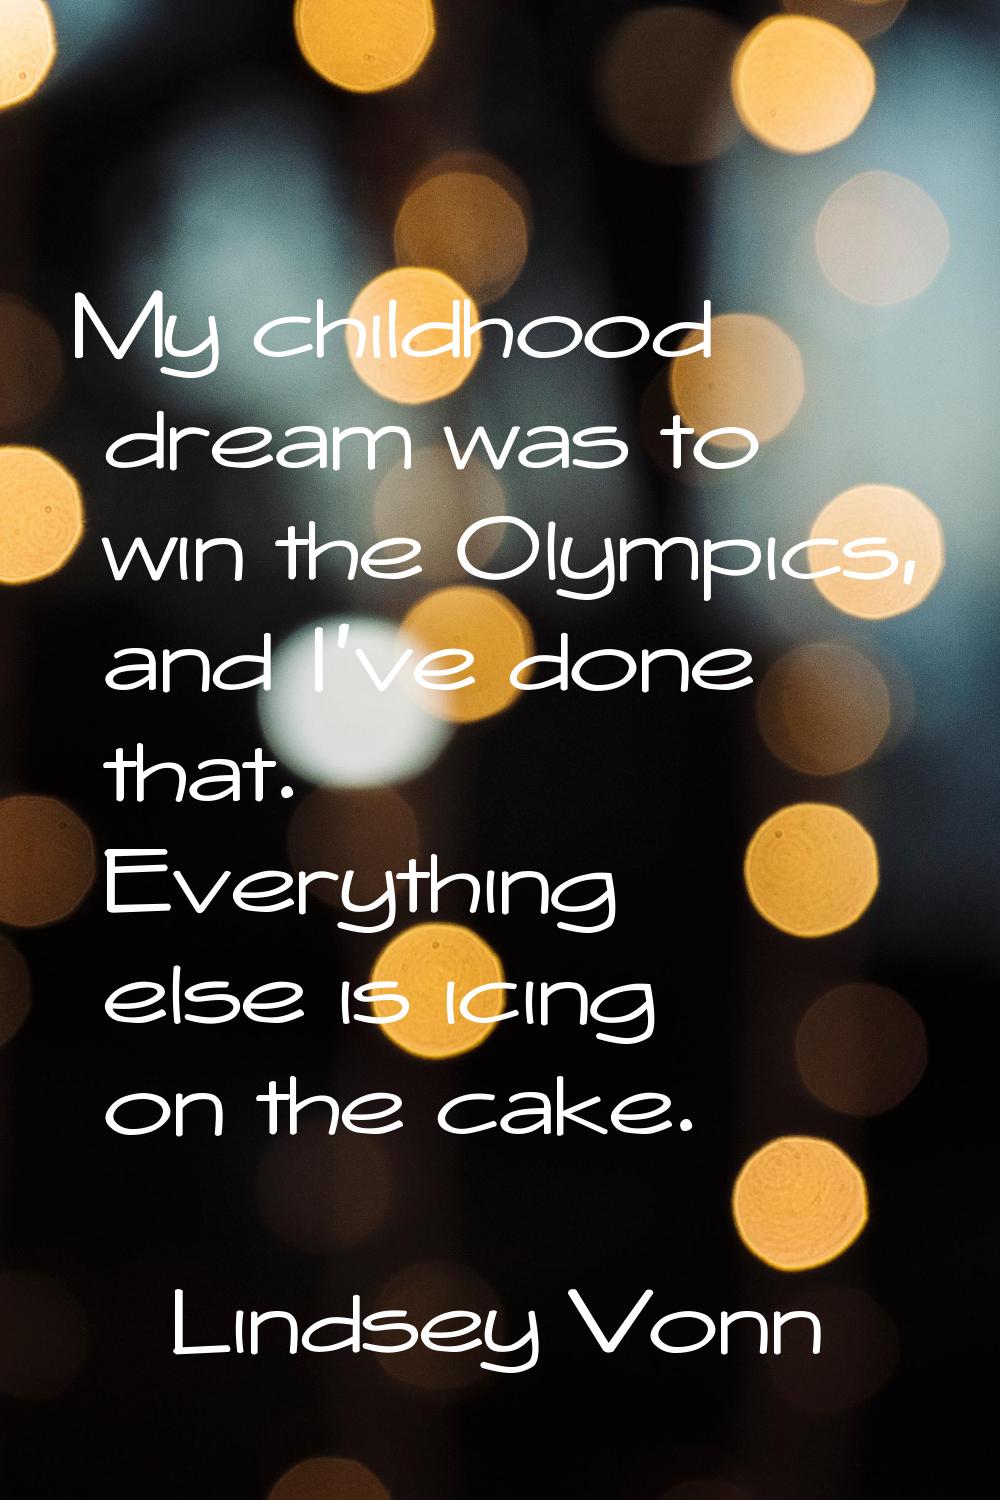 My childhood dream was to win the Olympics, and I've done that. Everything else is icing on the cak